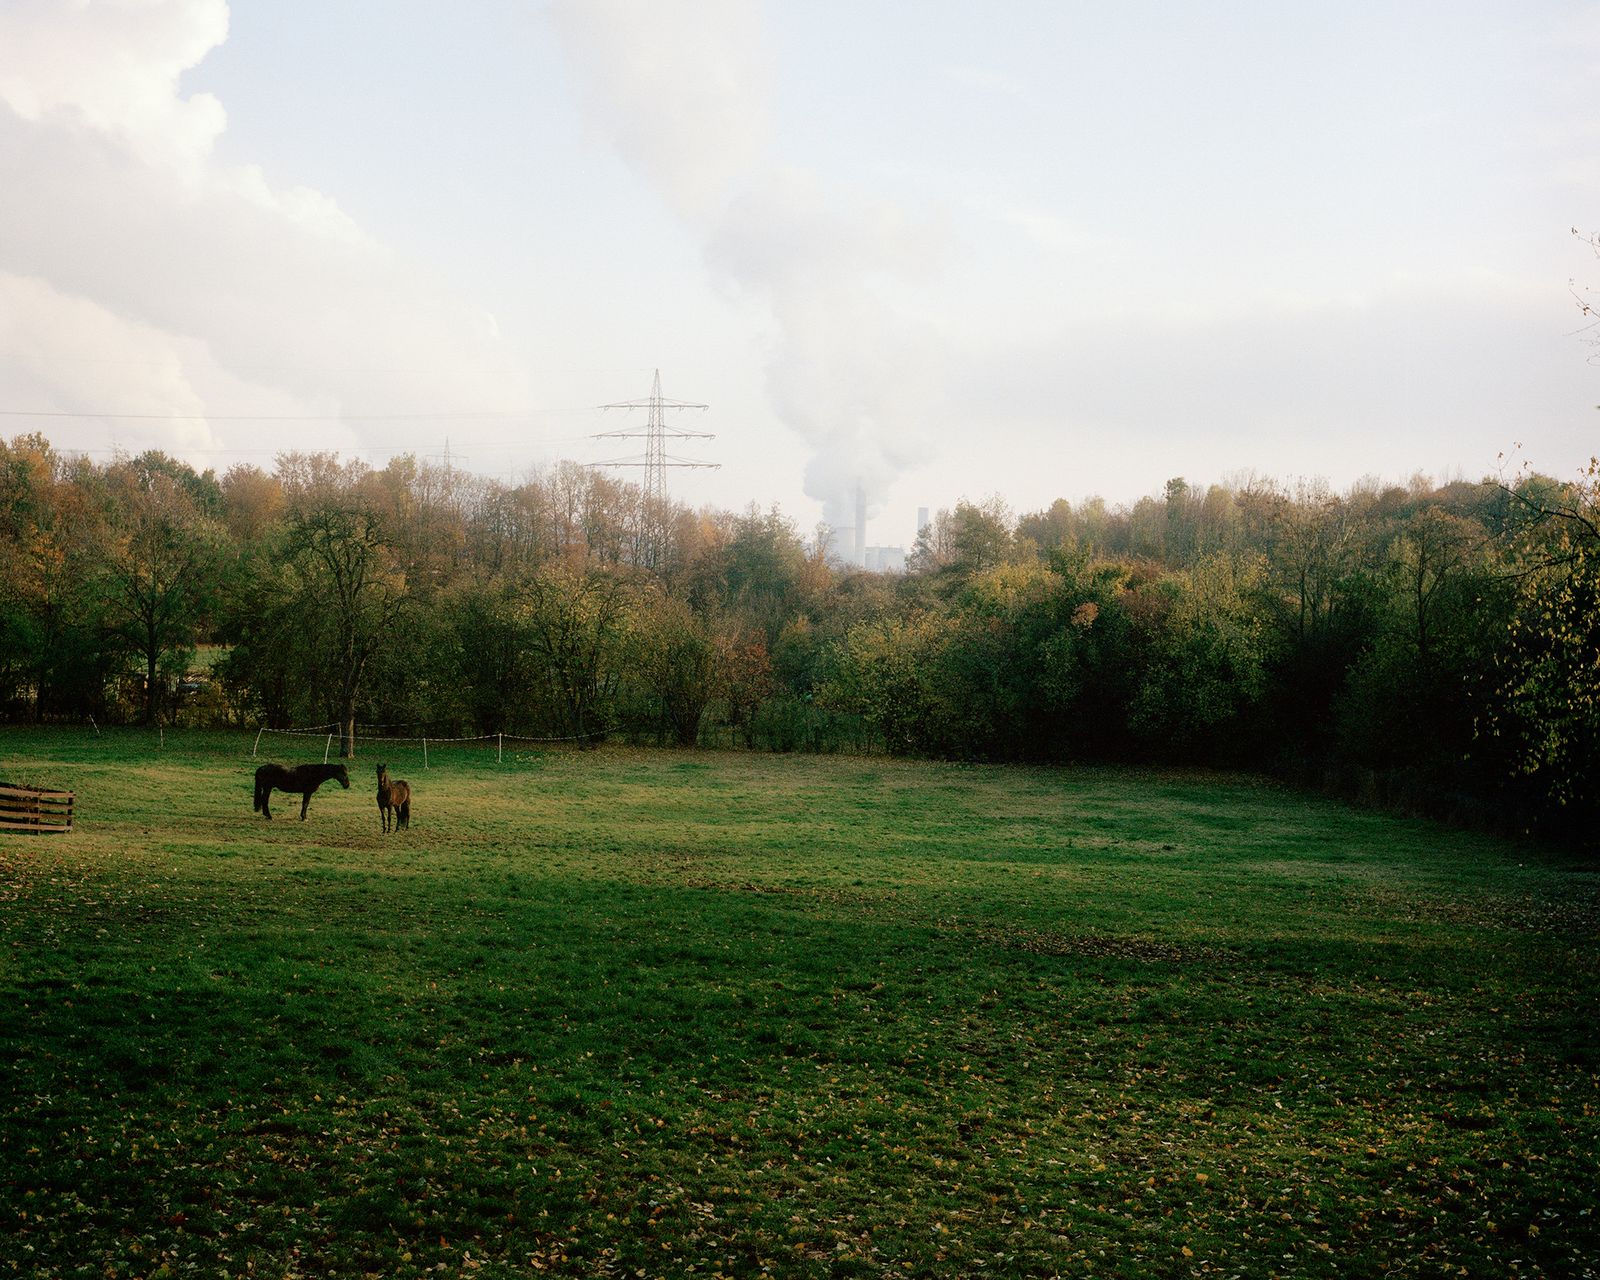 © Pietro Viti - Image from the The coal file vol.2: Das Braunkholeland photography project